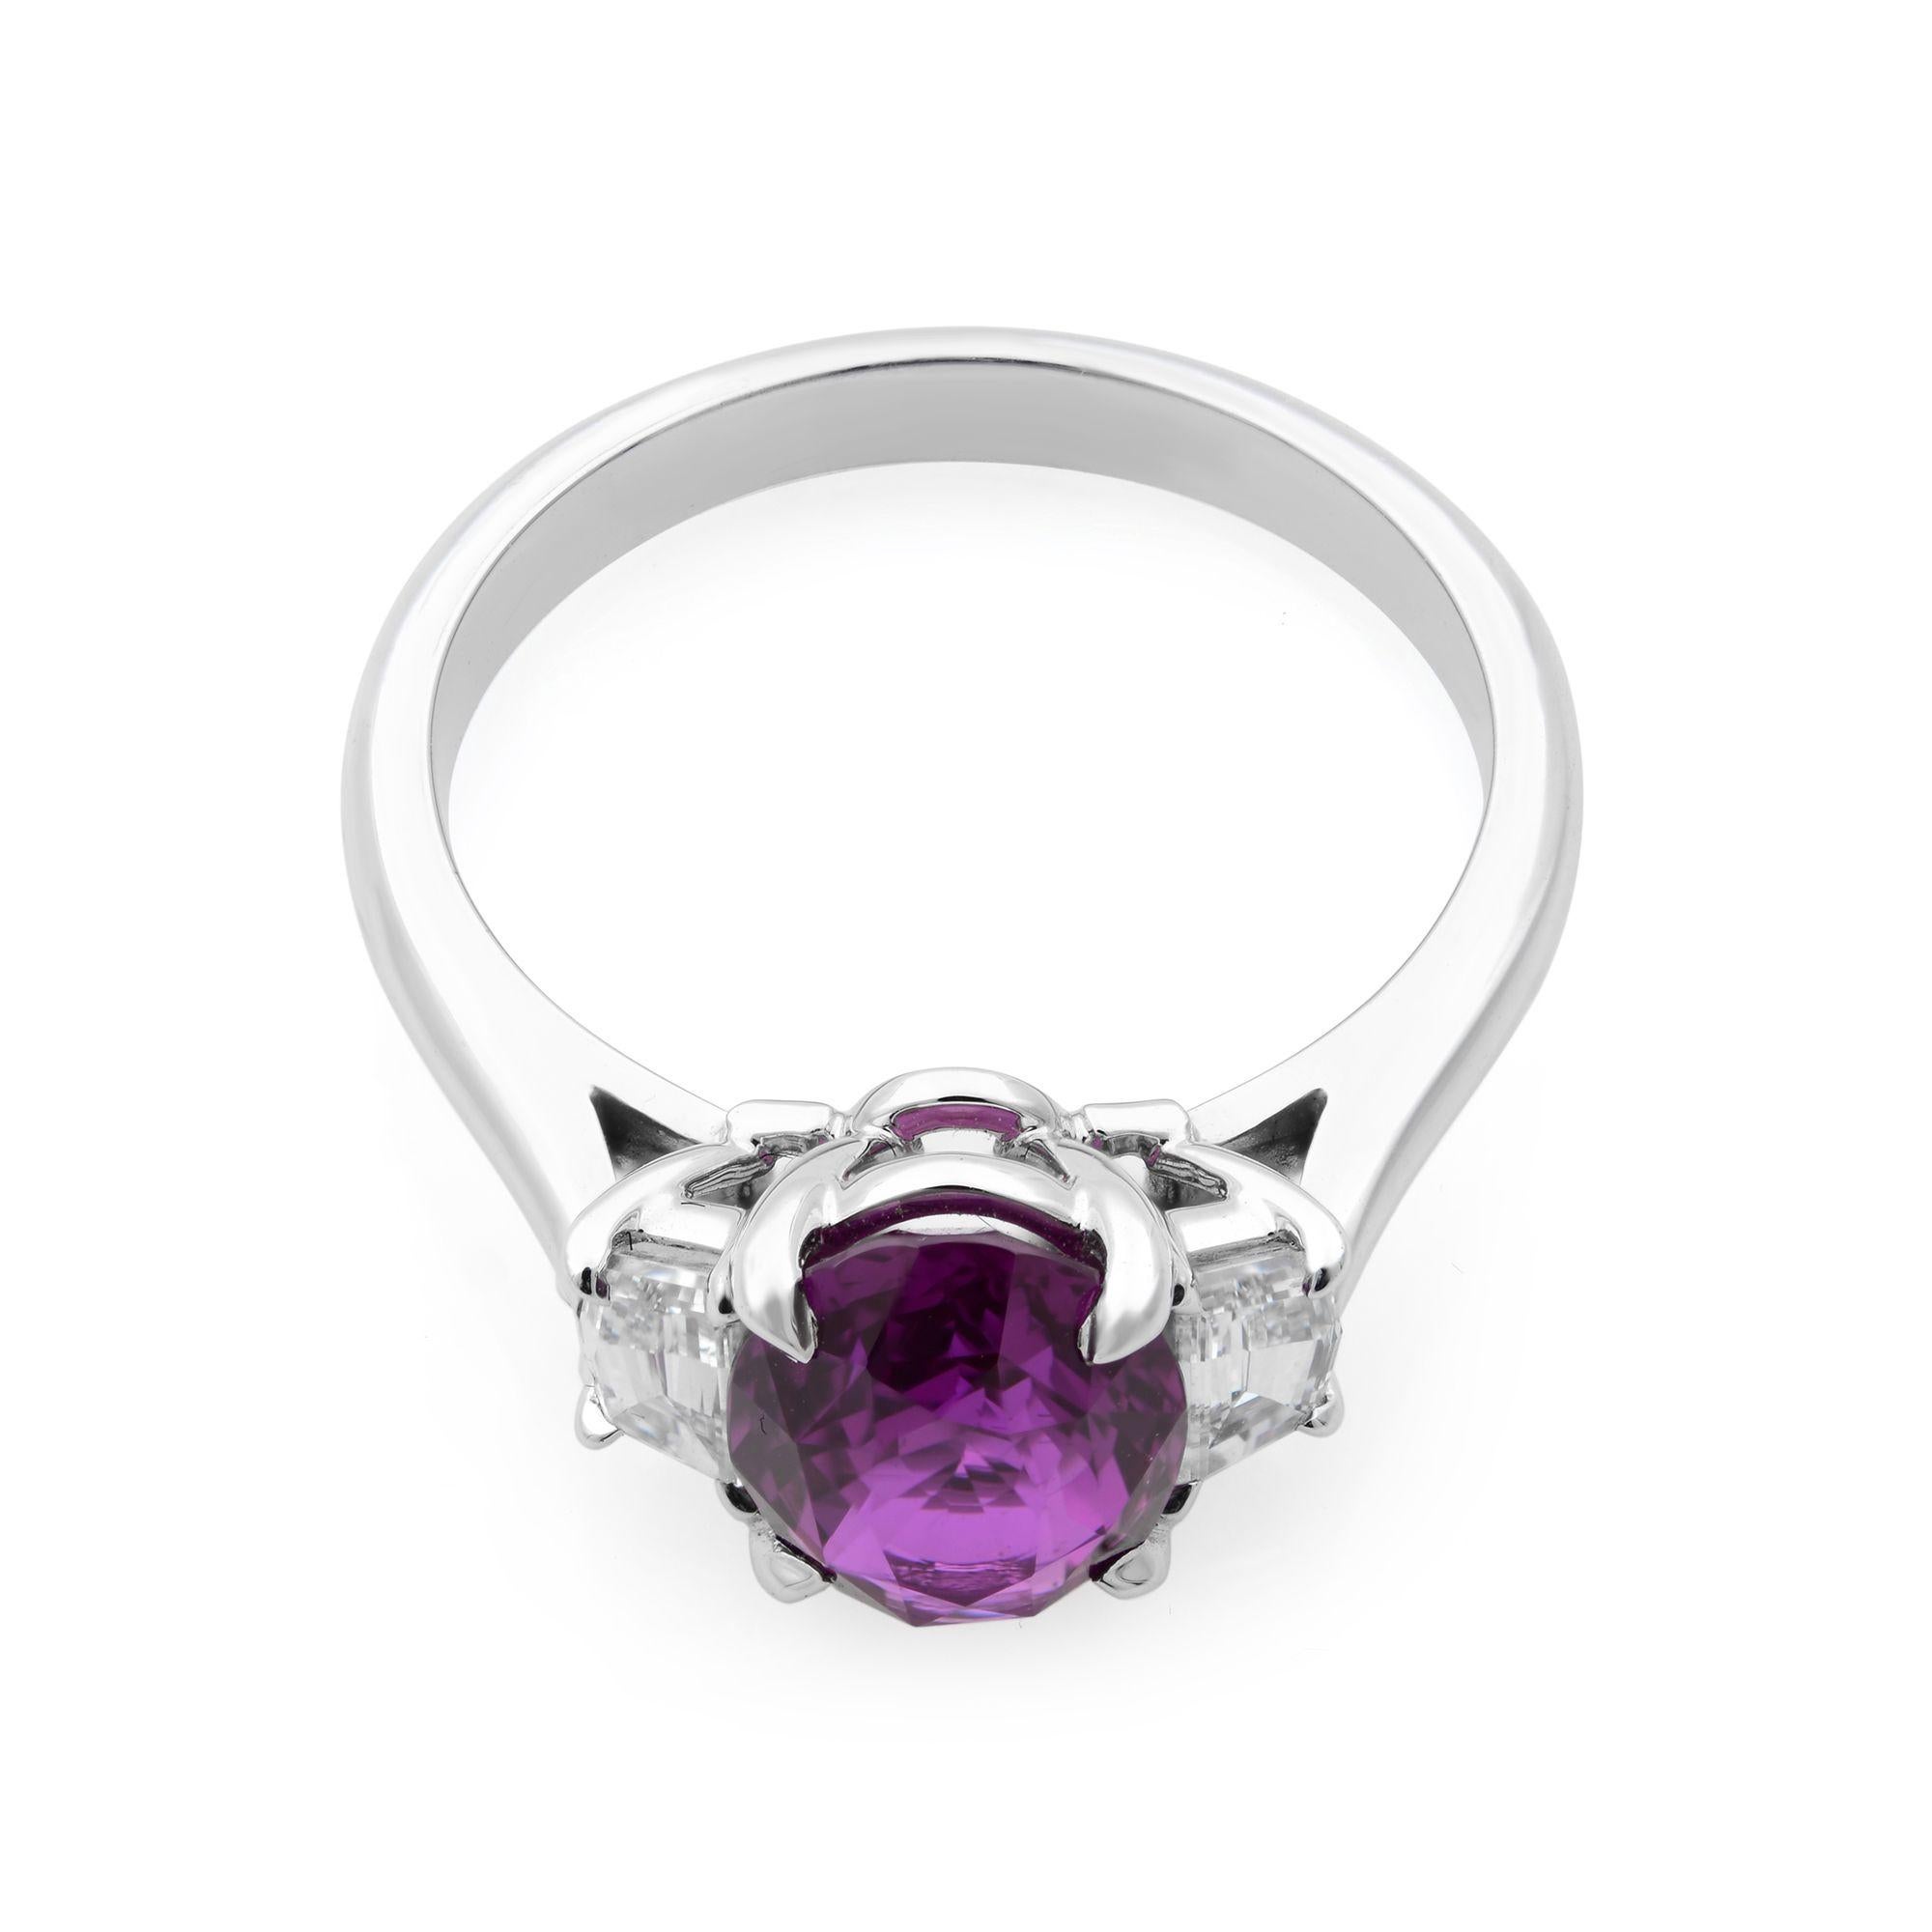 Oval Cut 2.61cts Oval Pink Sapphire & Diamond Three Stone Engagement Ring 18K White Gold